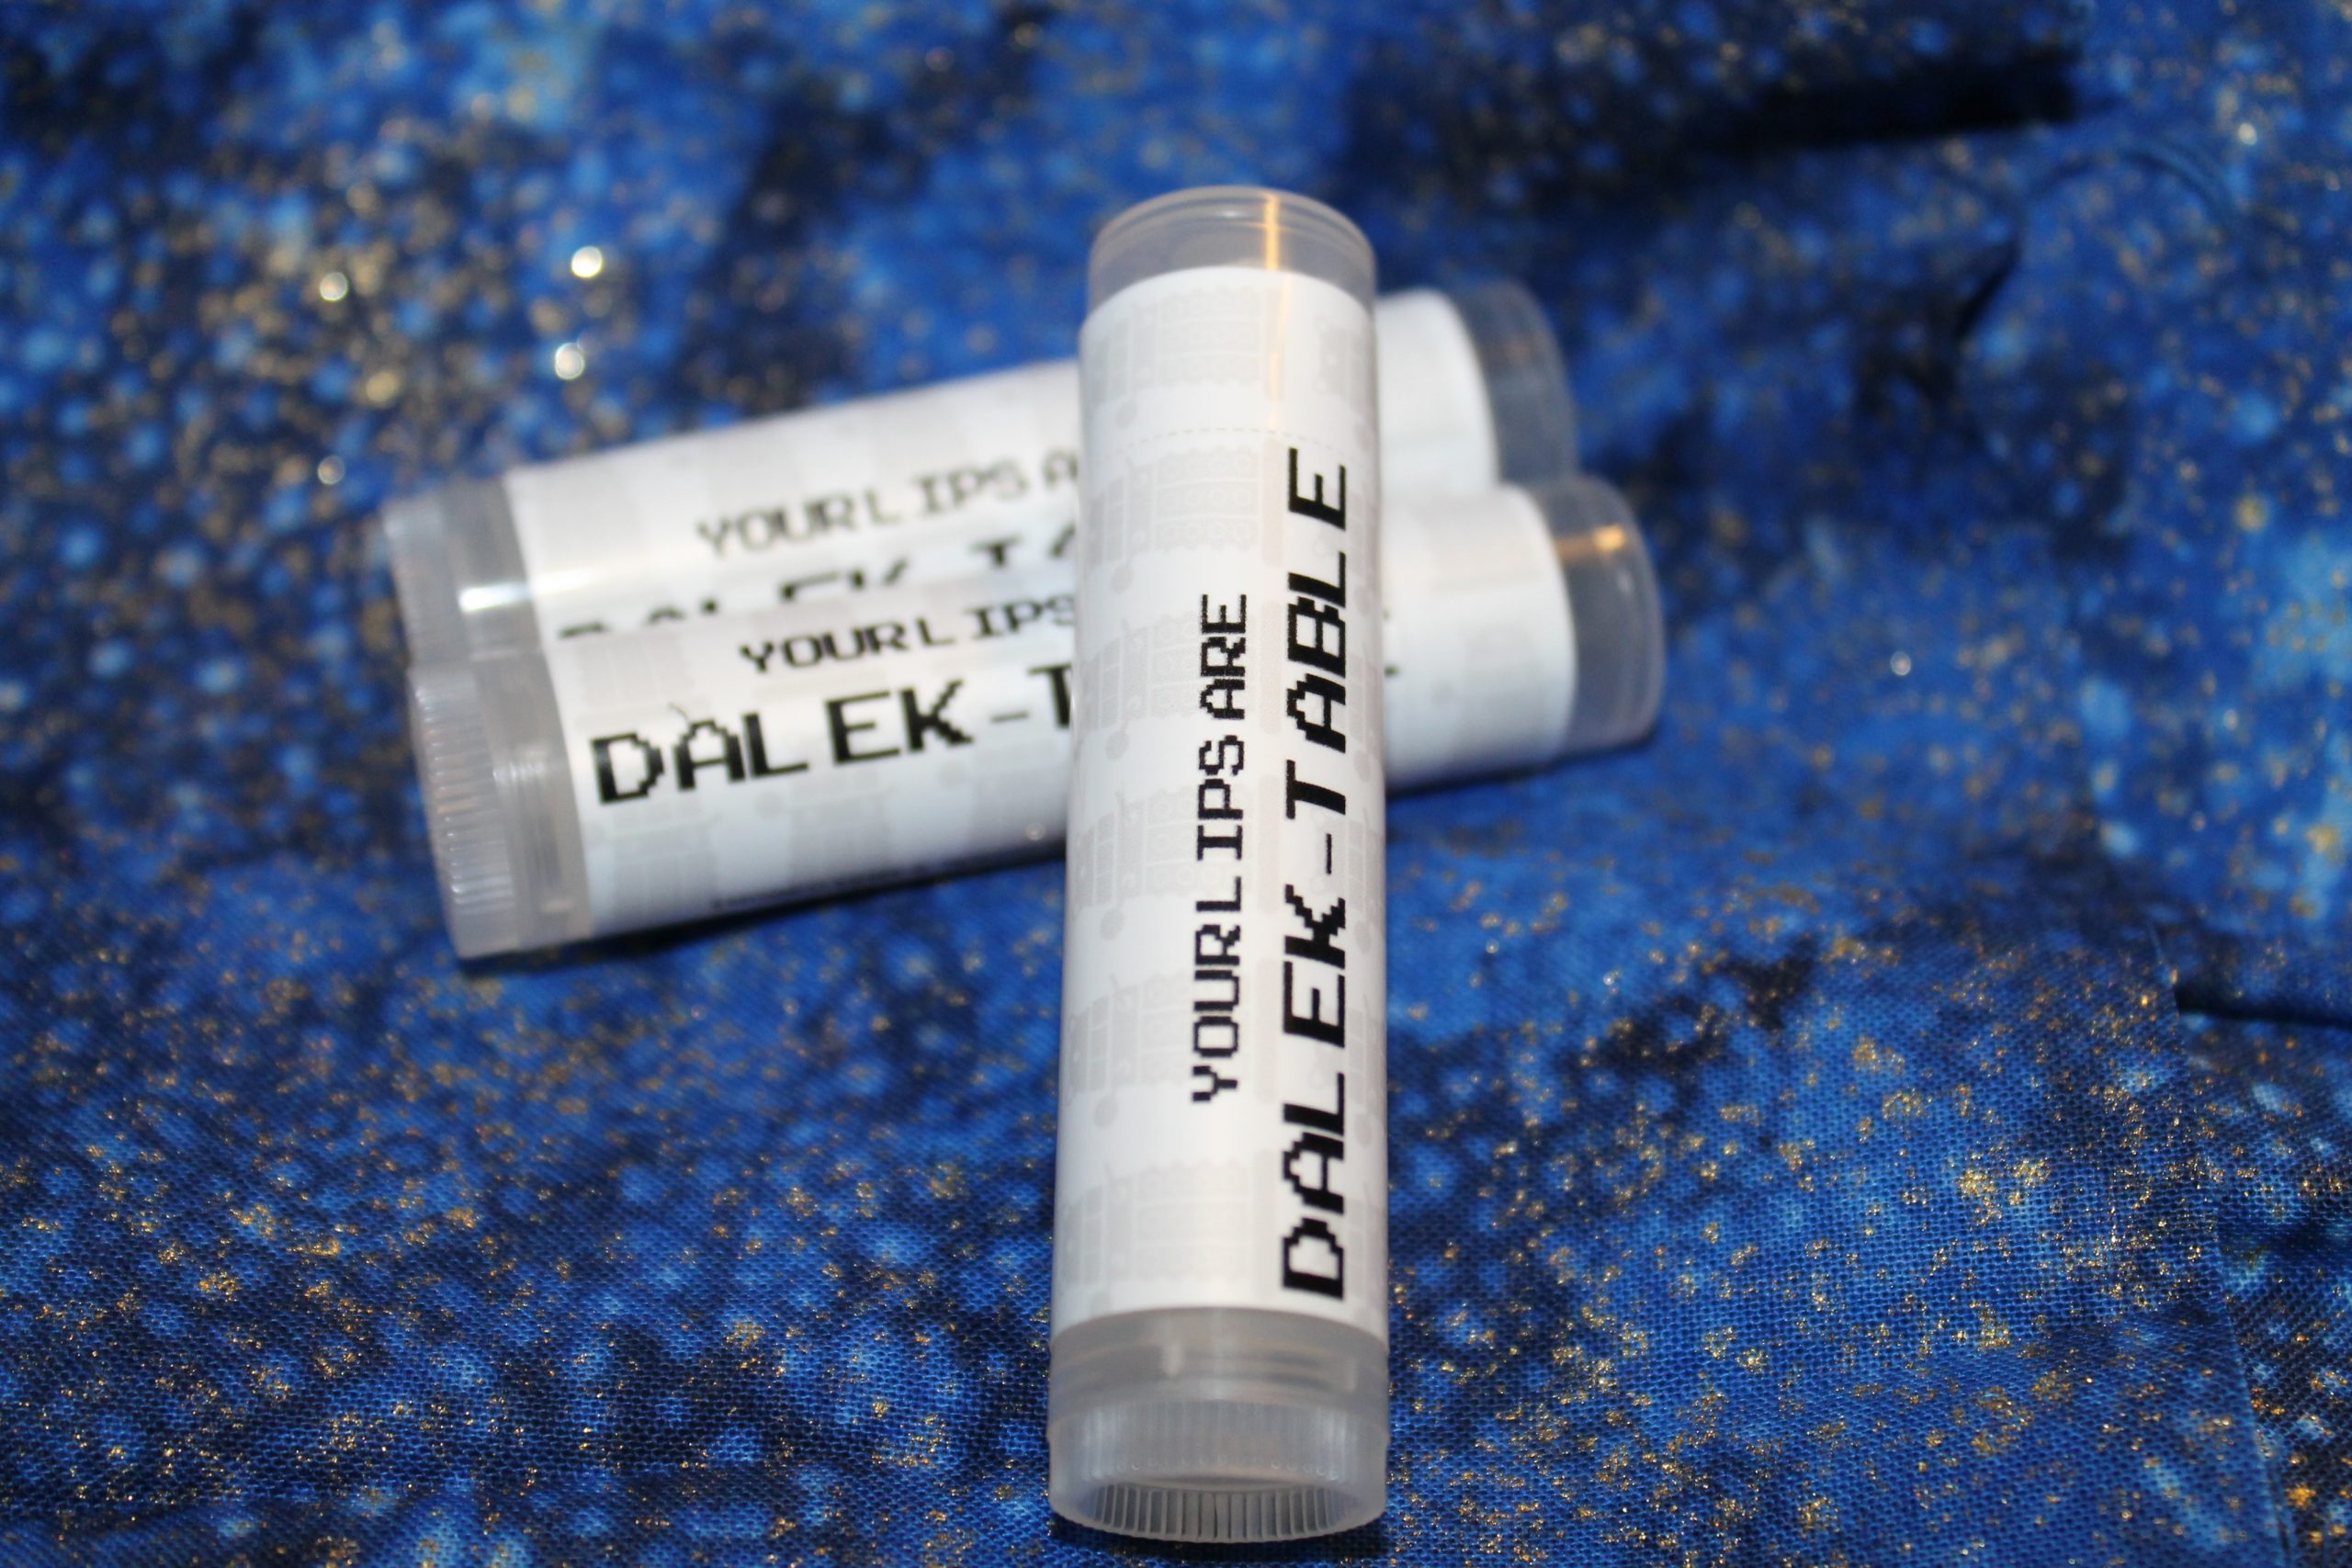 Dalek-table lip balm with cinnamon ginger mint scent